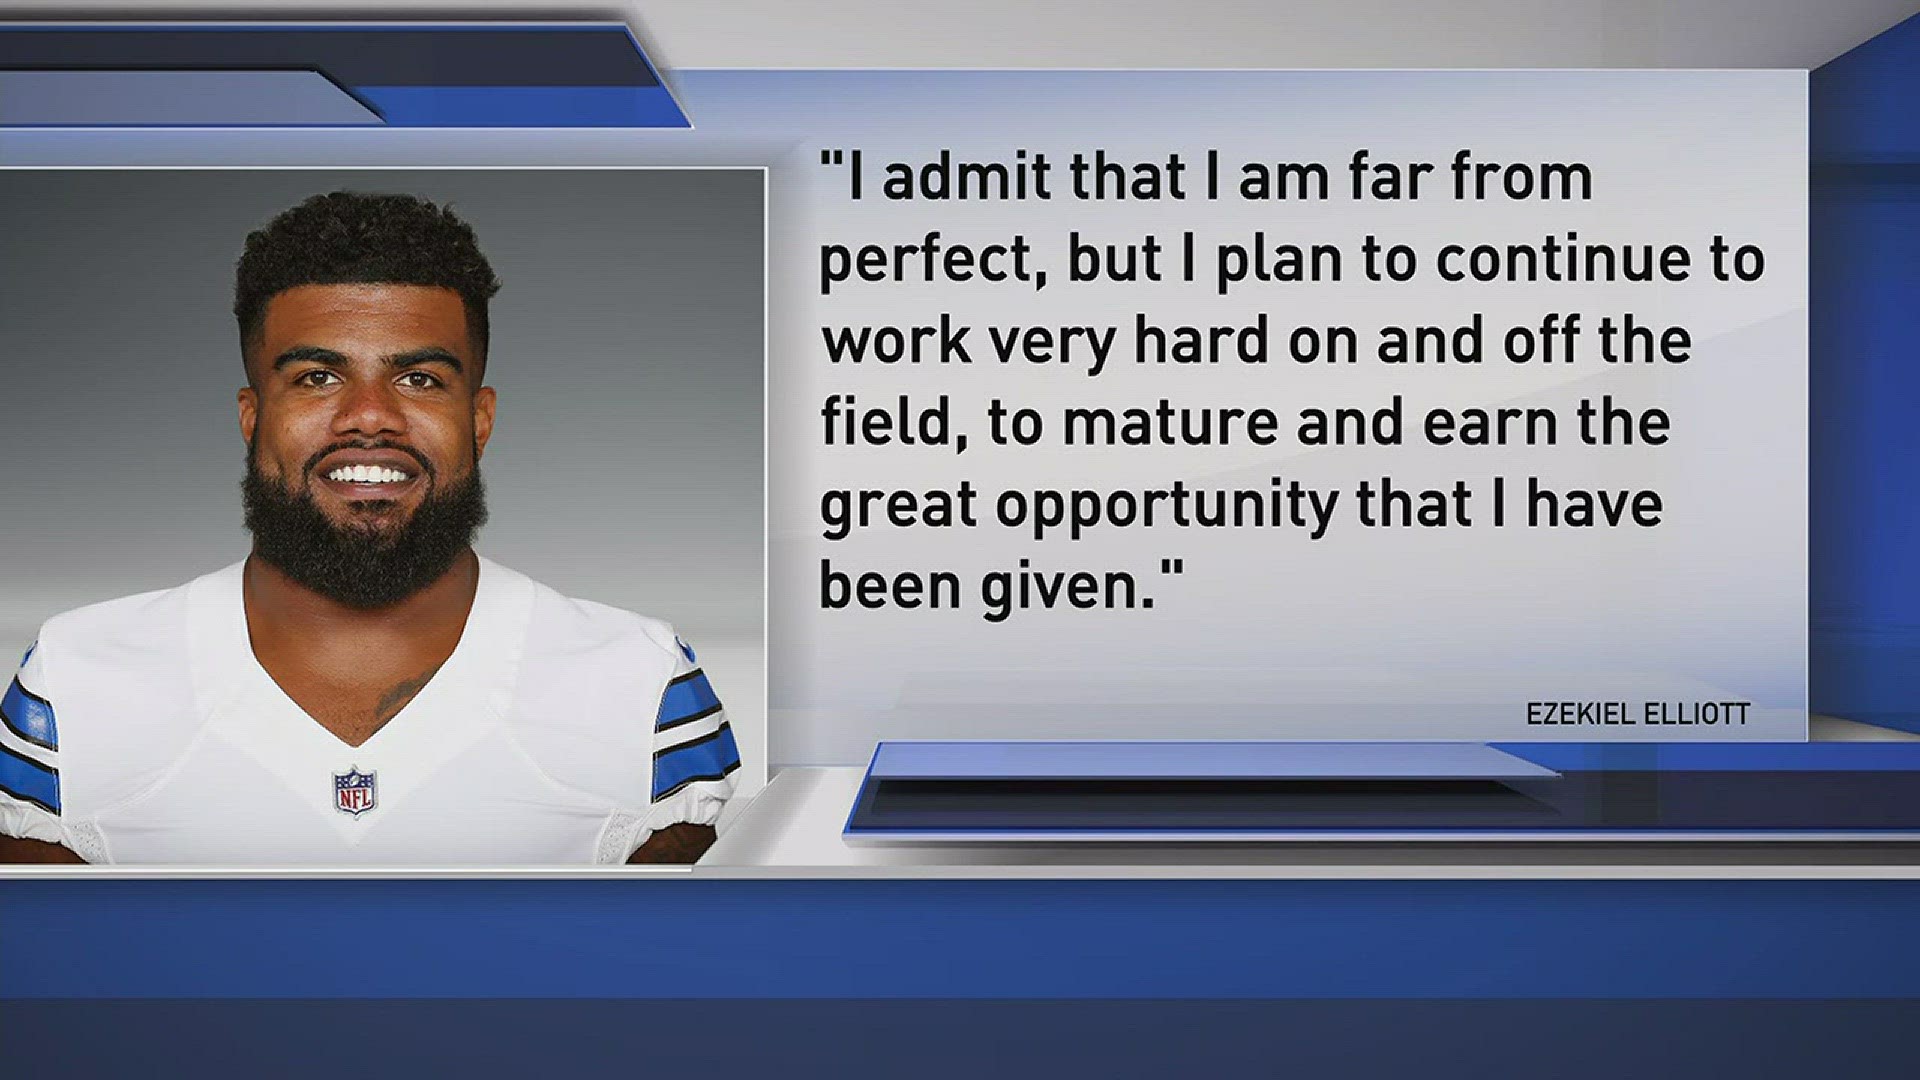 Ezekiel Elliott responded late Friday to the six-game suspension handed down by the NFL. Rebecca Lopez has more.